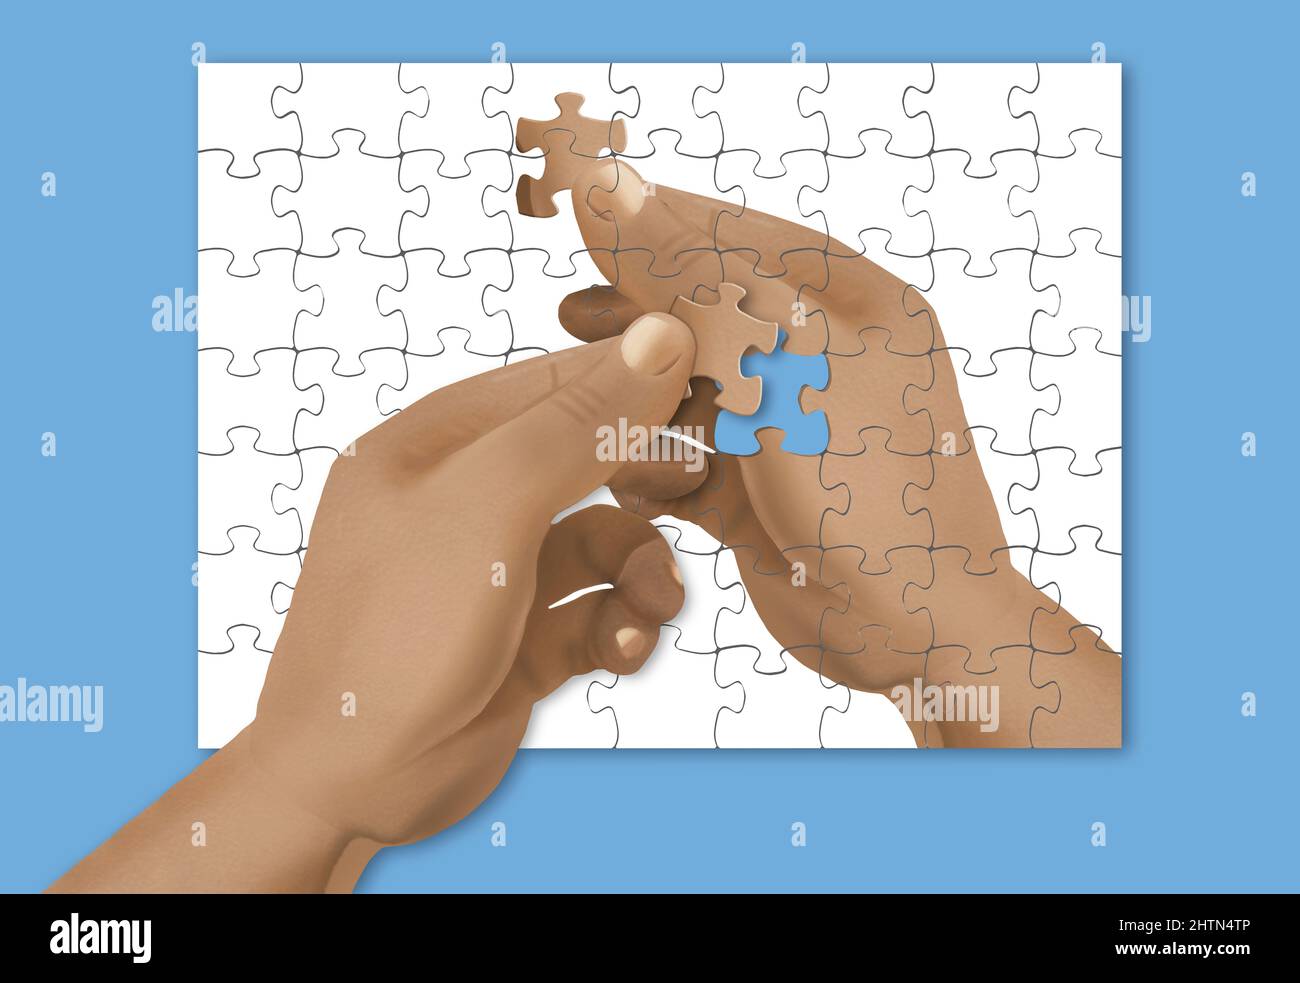 IRONIC JIGSAW PUZZLE-A puzzle of a hand holding a puzzle pieces is  completed by an identical hand holding the last piece in a 3-d illustration  Stock Photo - Alamy